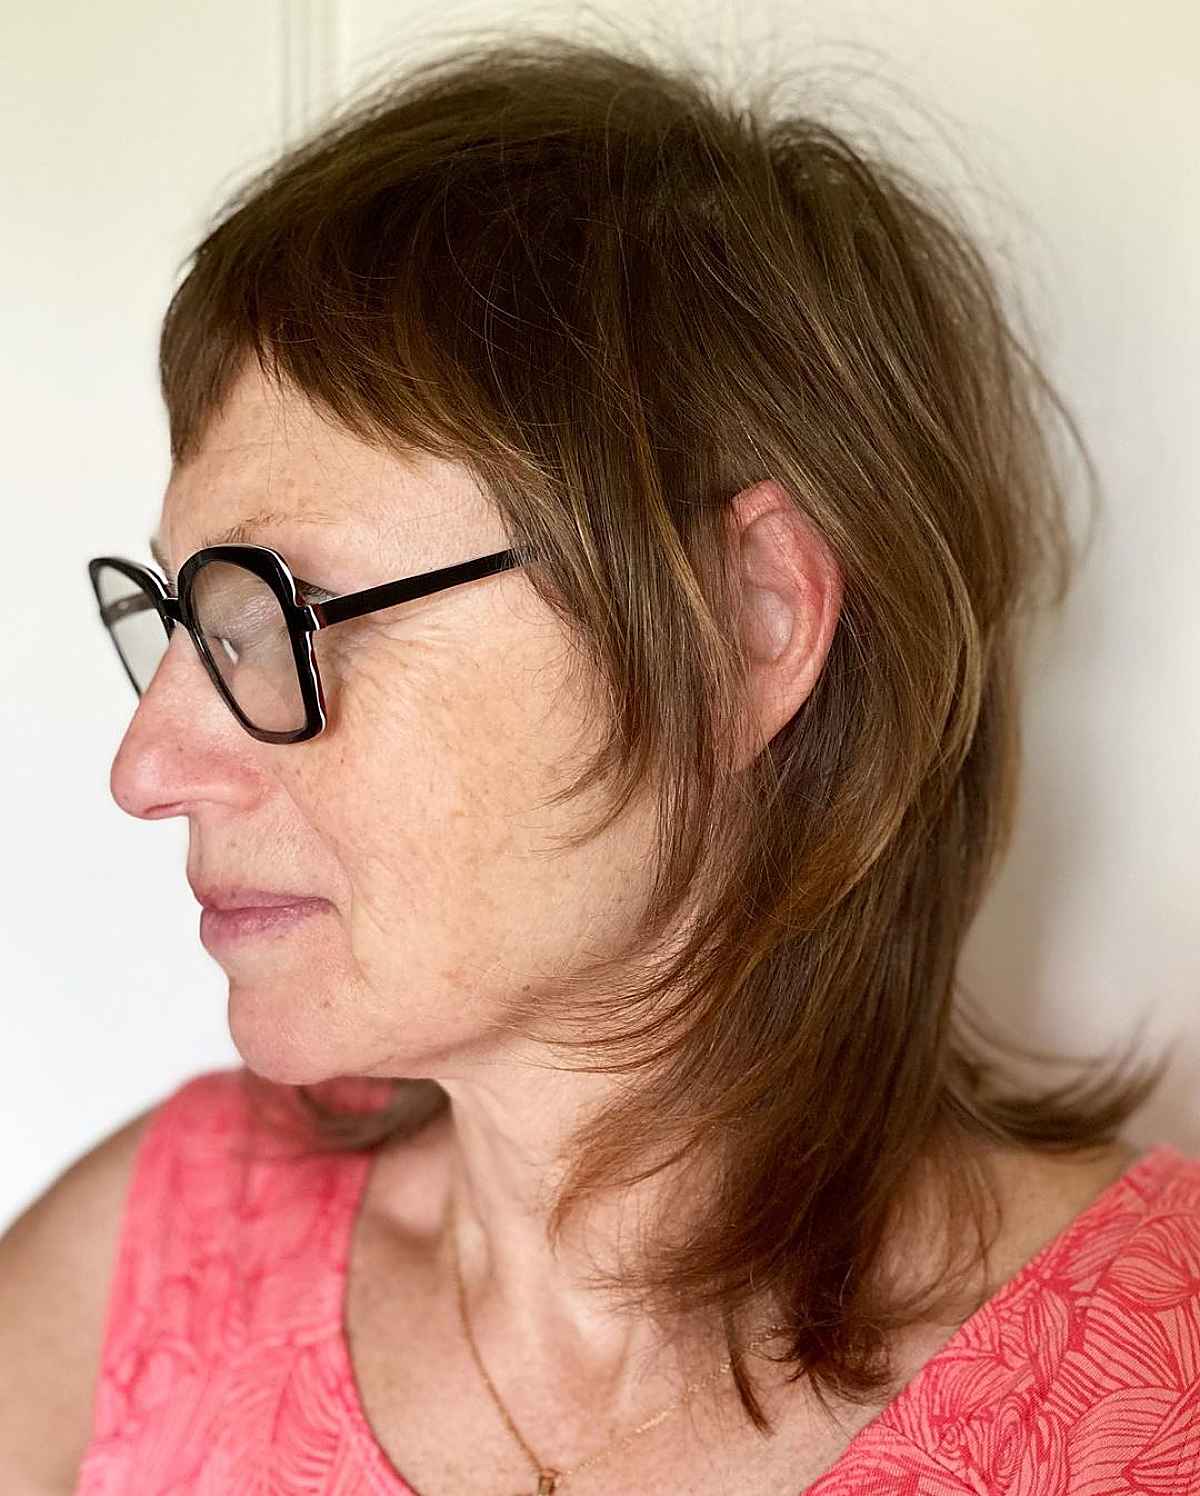 Shoulder-Length Hairstyle with Glasses for ladies in their sixties